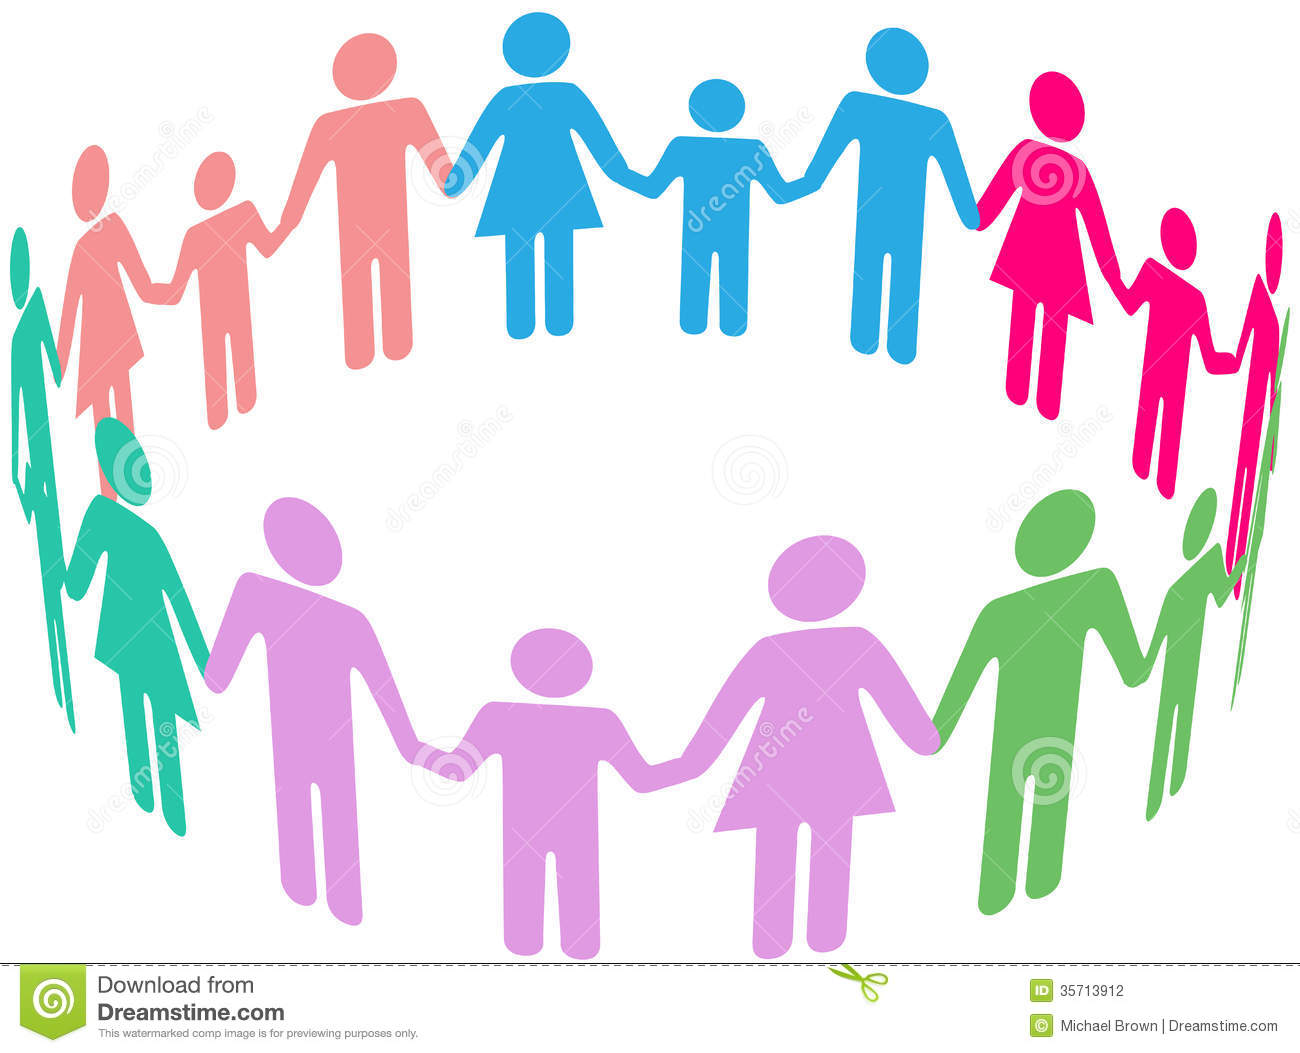 Family Diversity Social Community People Stock Photography   Image